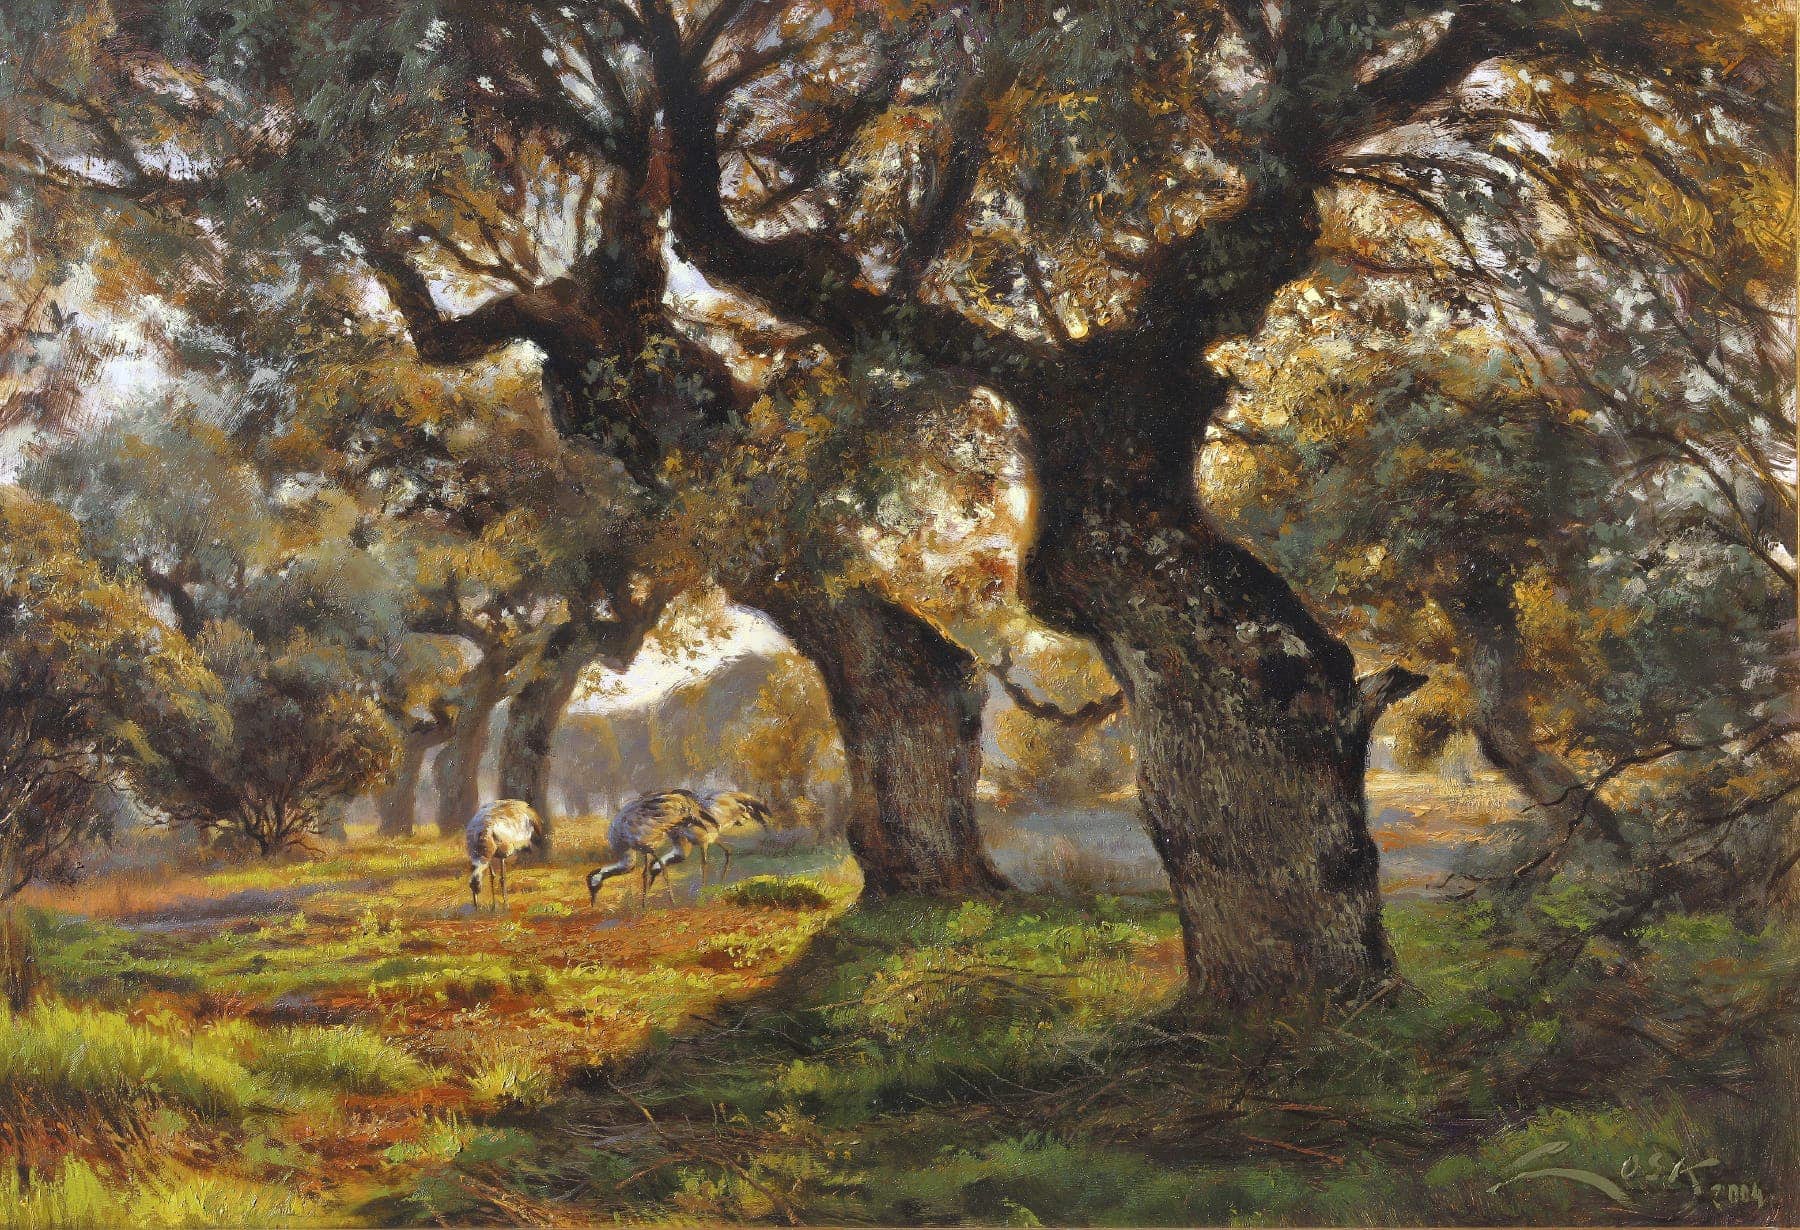 Cranes and Spanish Holm oaks picture